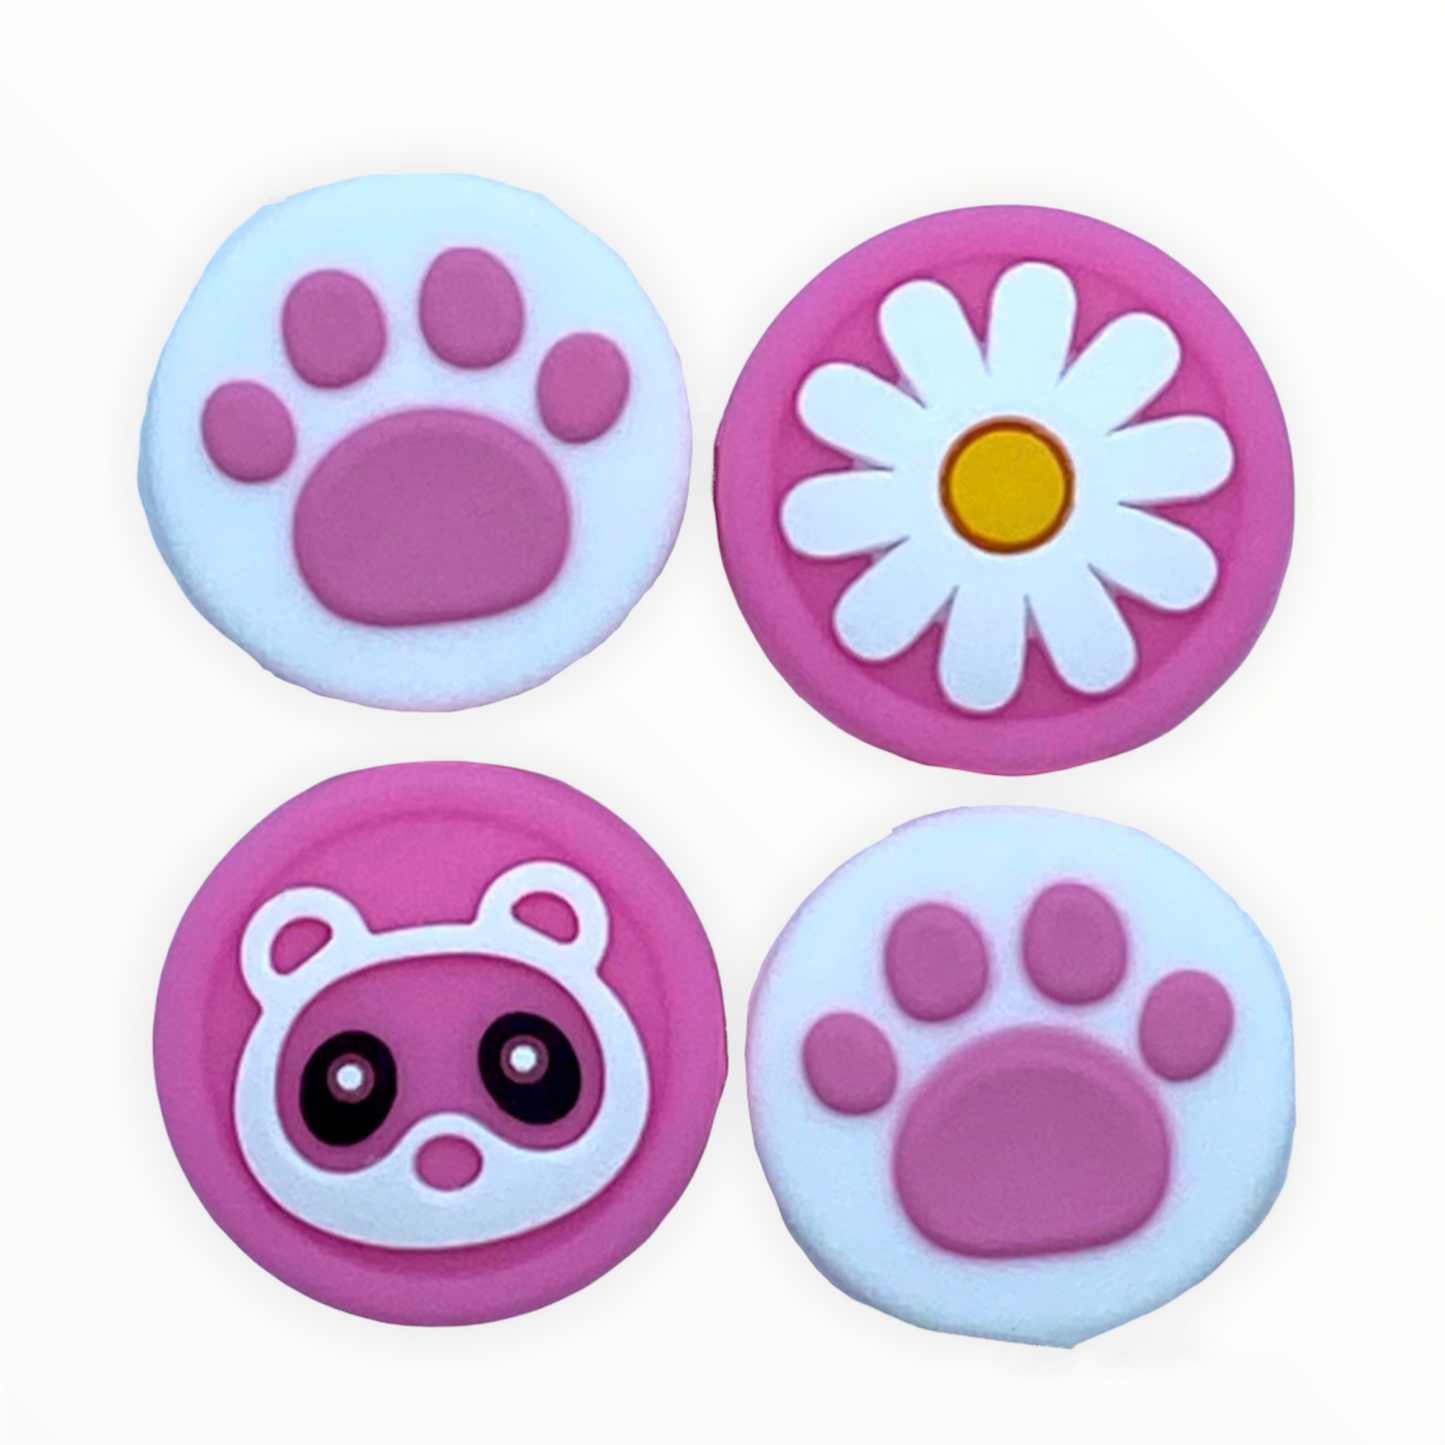 JenDore Pink White 4Pcs Paw Flower Raccoon Animal Crossing Silicone Thumb Grip Caps for Nintendo Switch